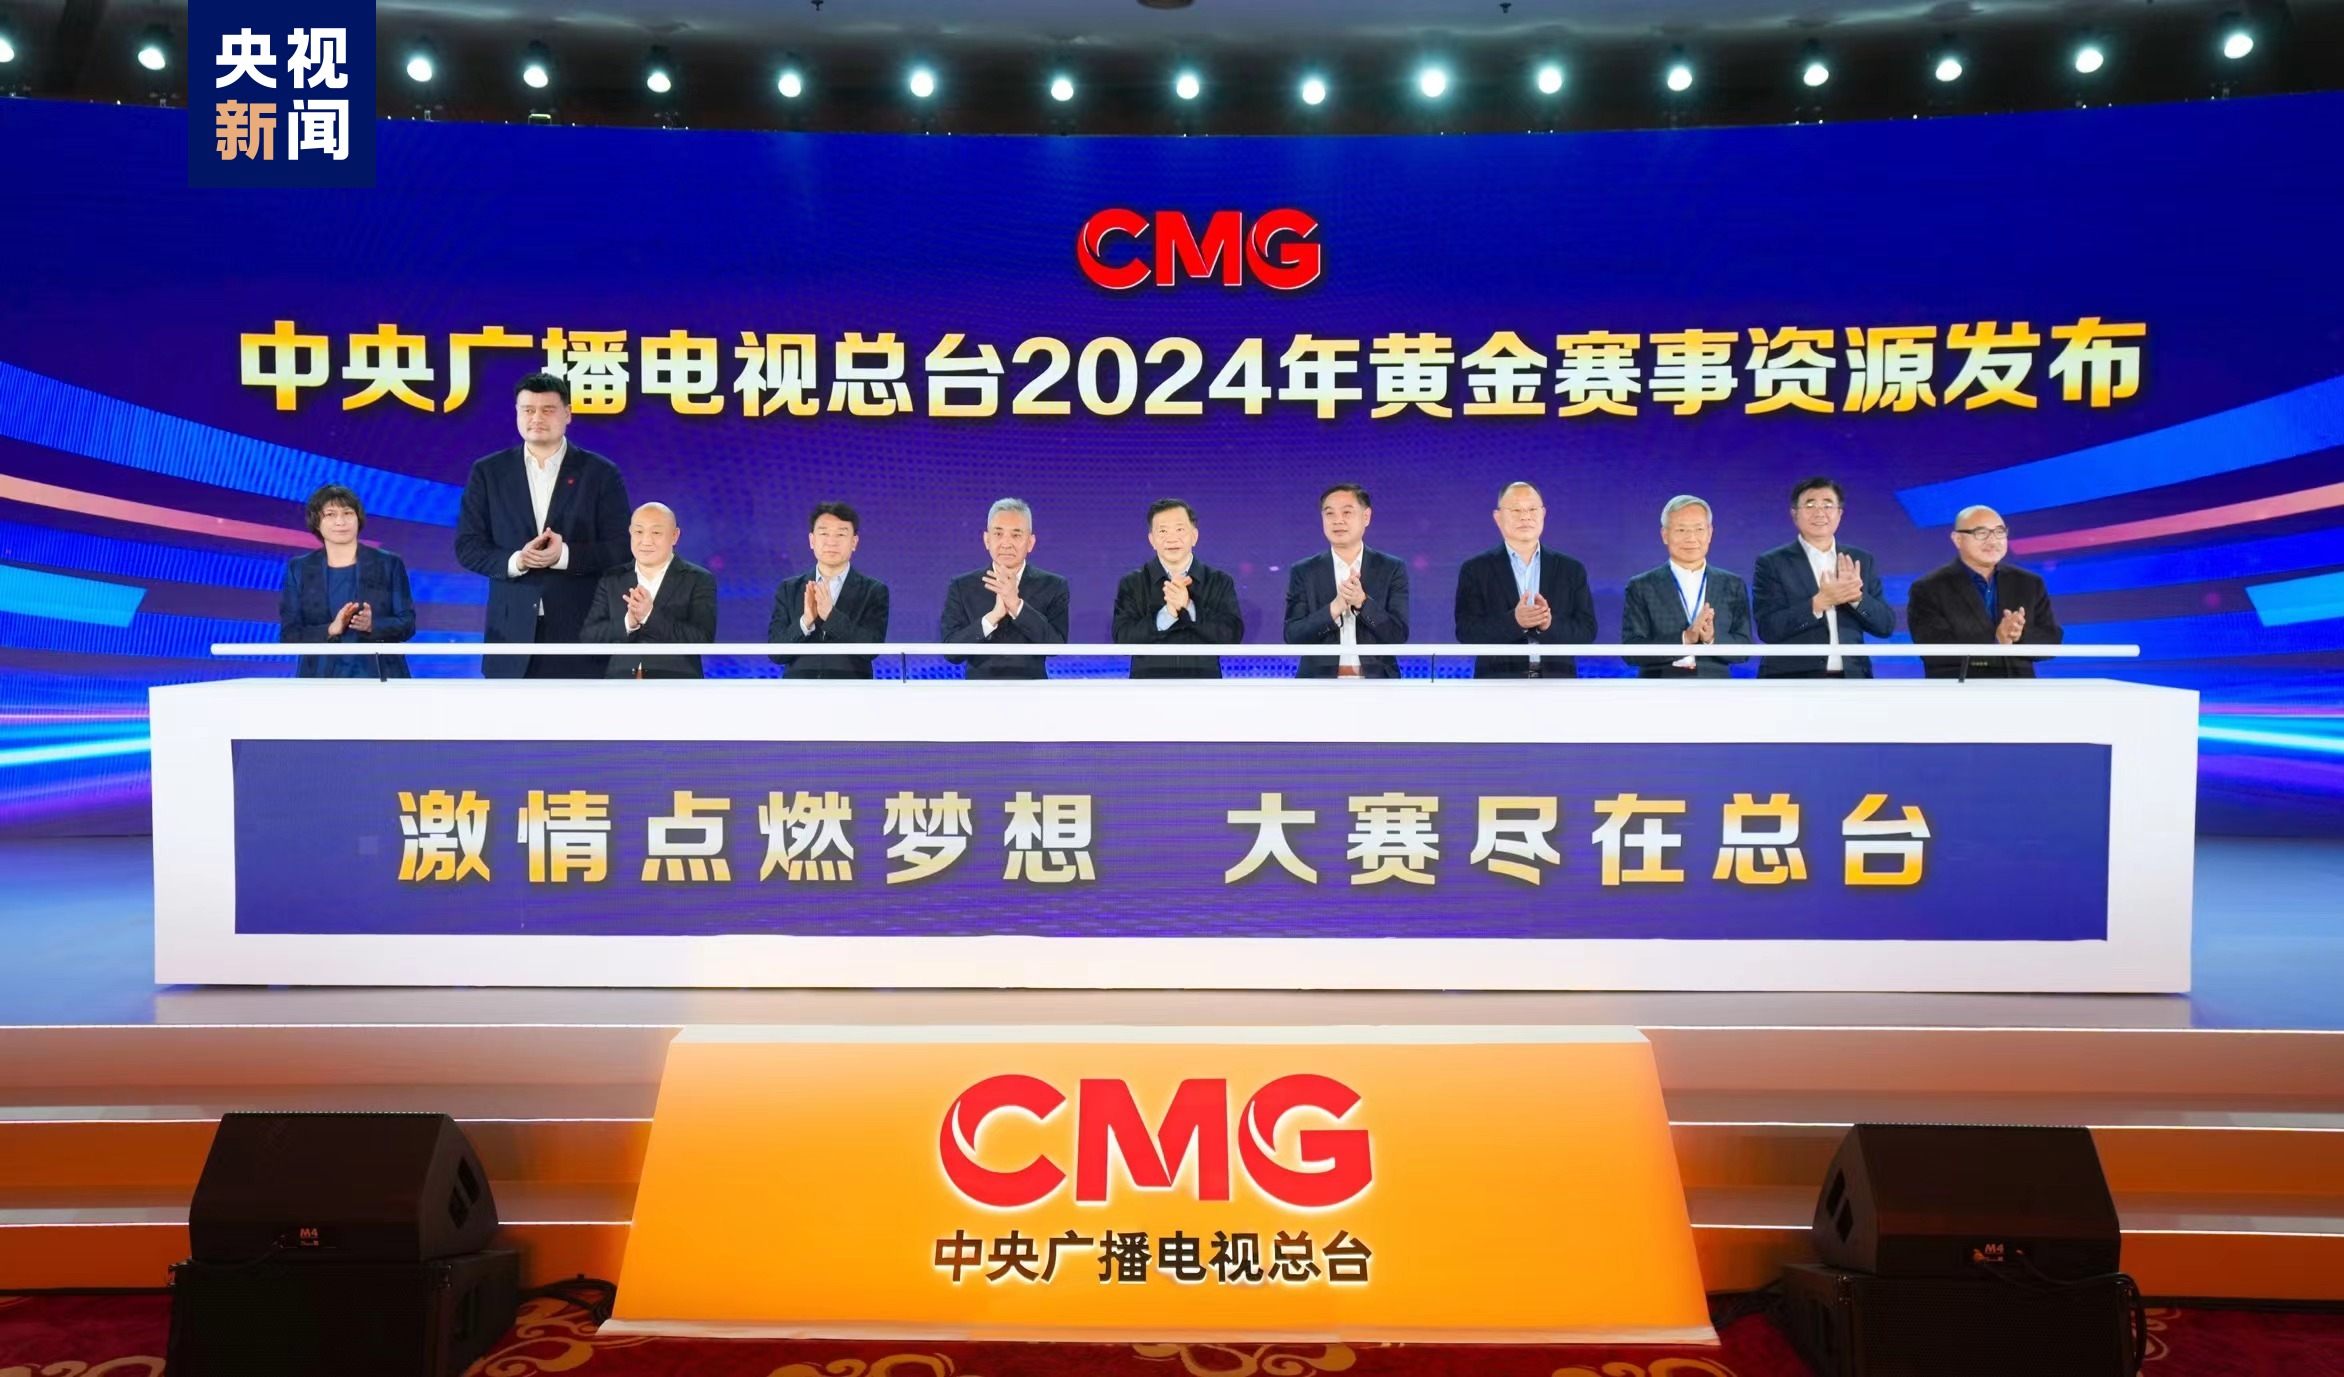 Shen Haixong (6th R) among guests during the ceremony in Beijing, China, January 5, 2024. /CMG